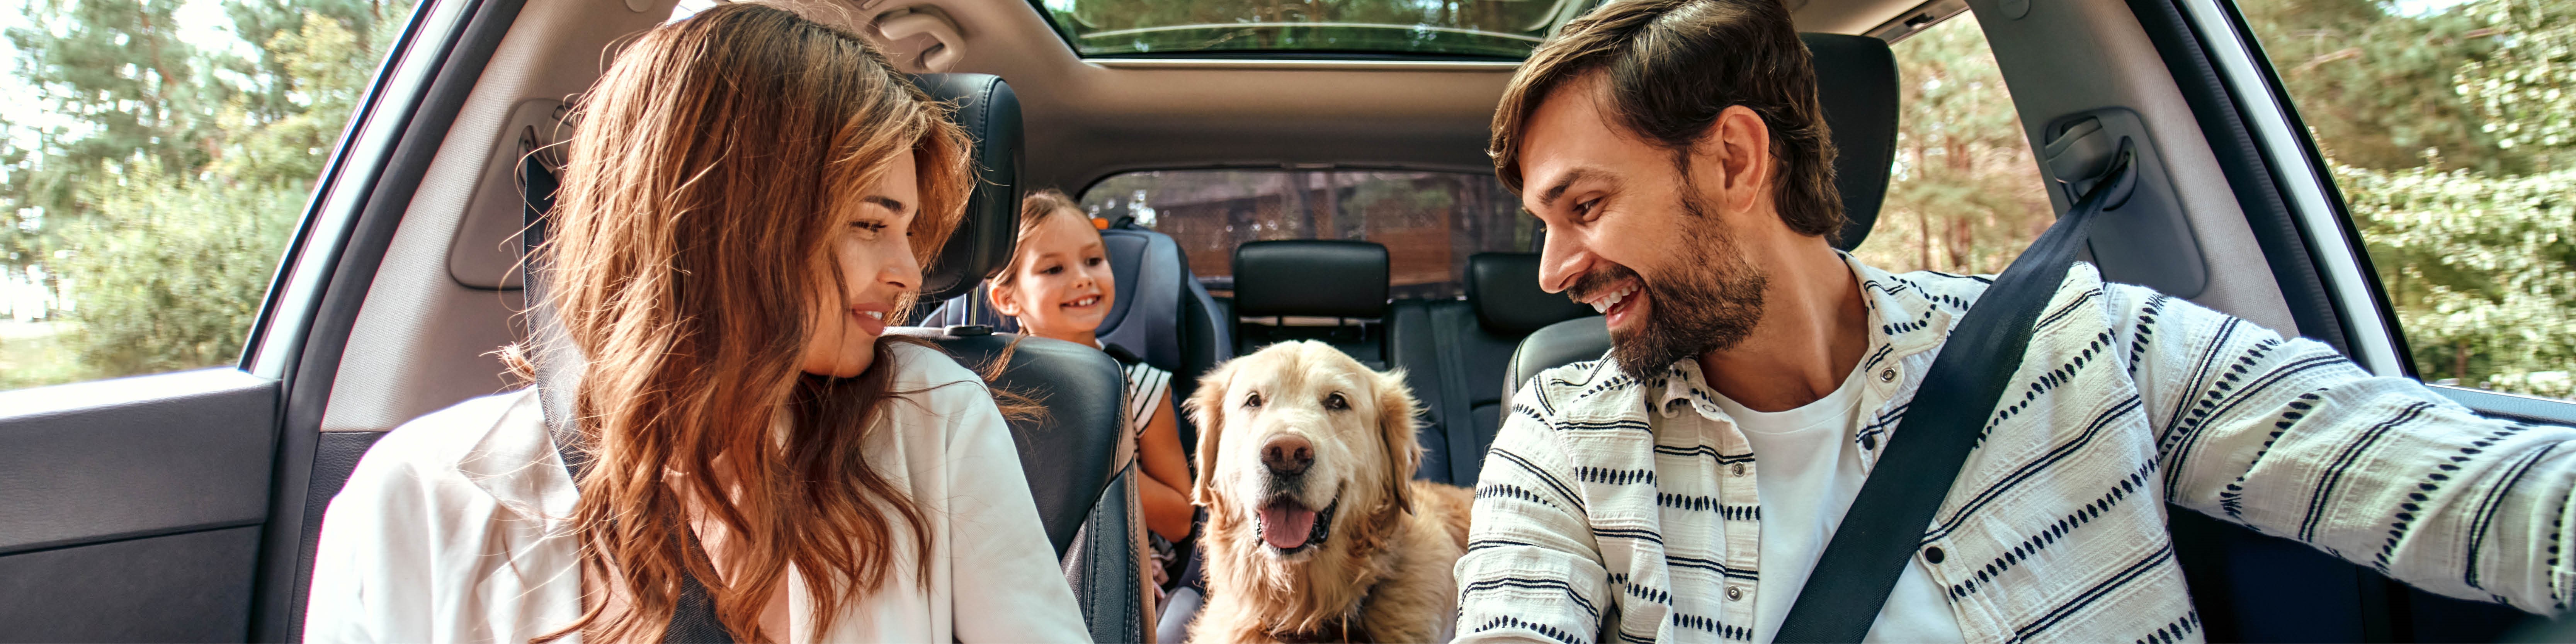 Family riding in car with dog 